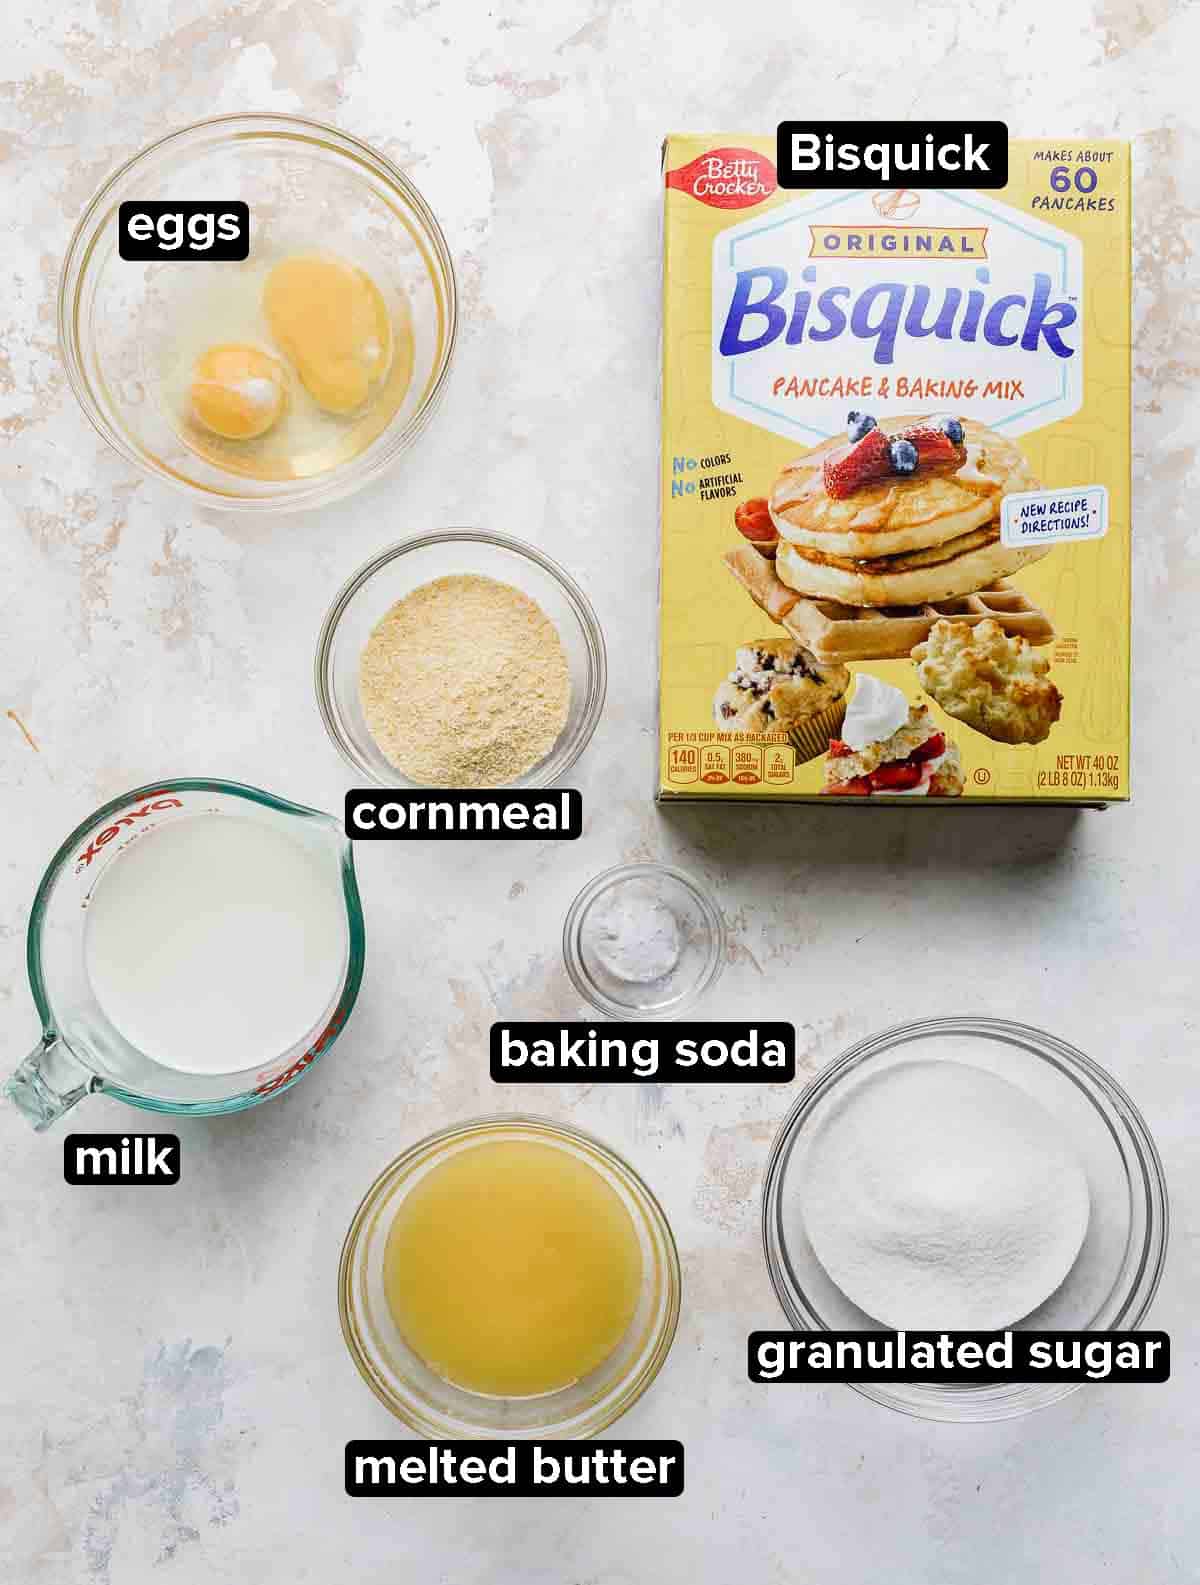 Bisquick Cornbread ingredients on a white and cream textured background; ingredients include a box of yellow Bisquick, cornmeal, milk, eggs, butter, sugar, and baking soda.